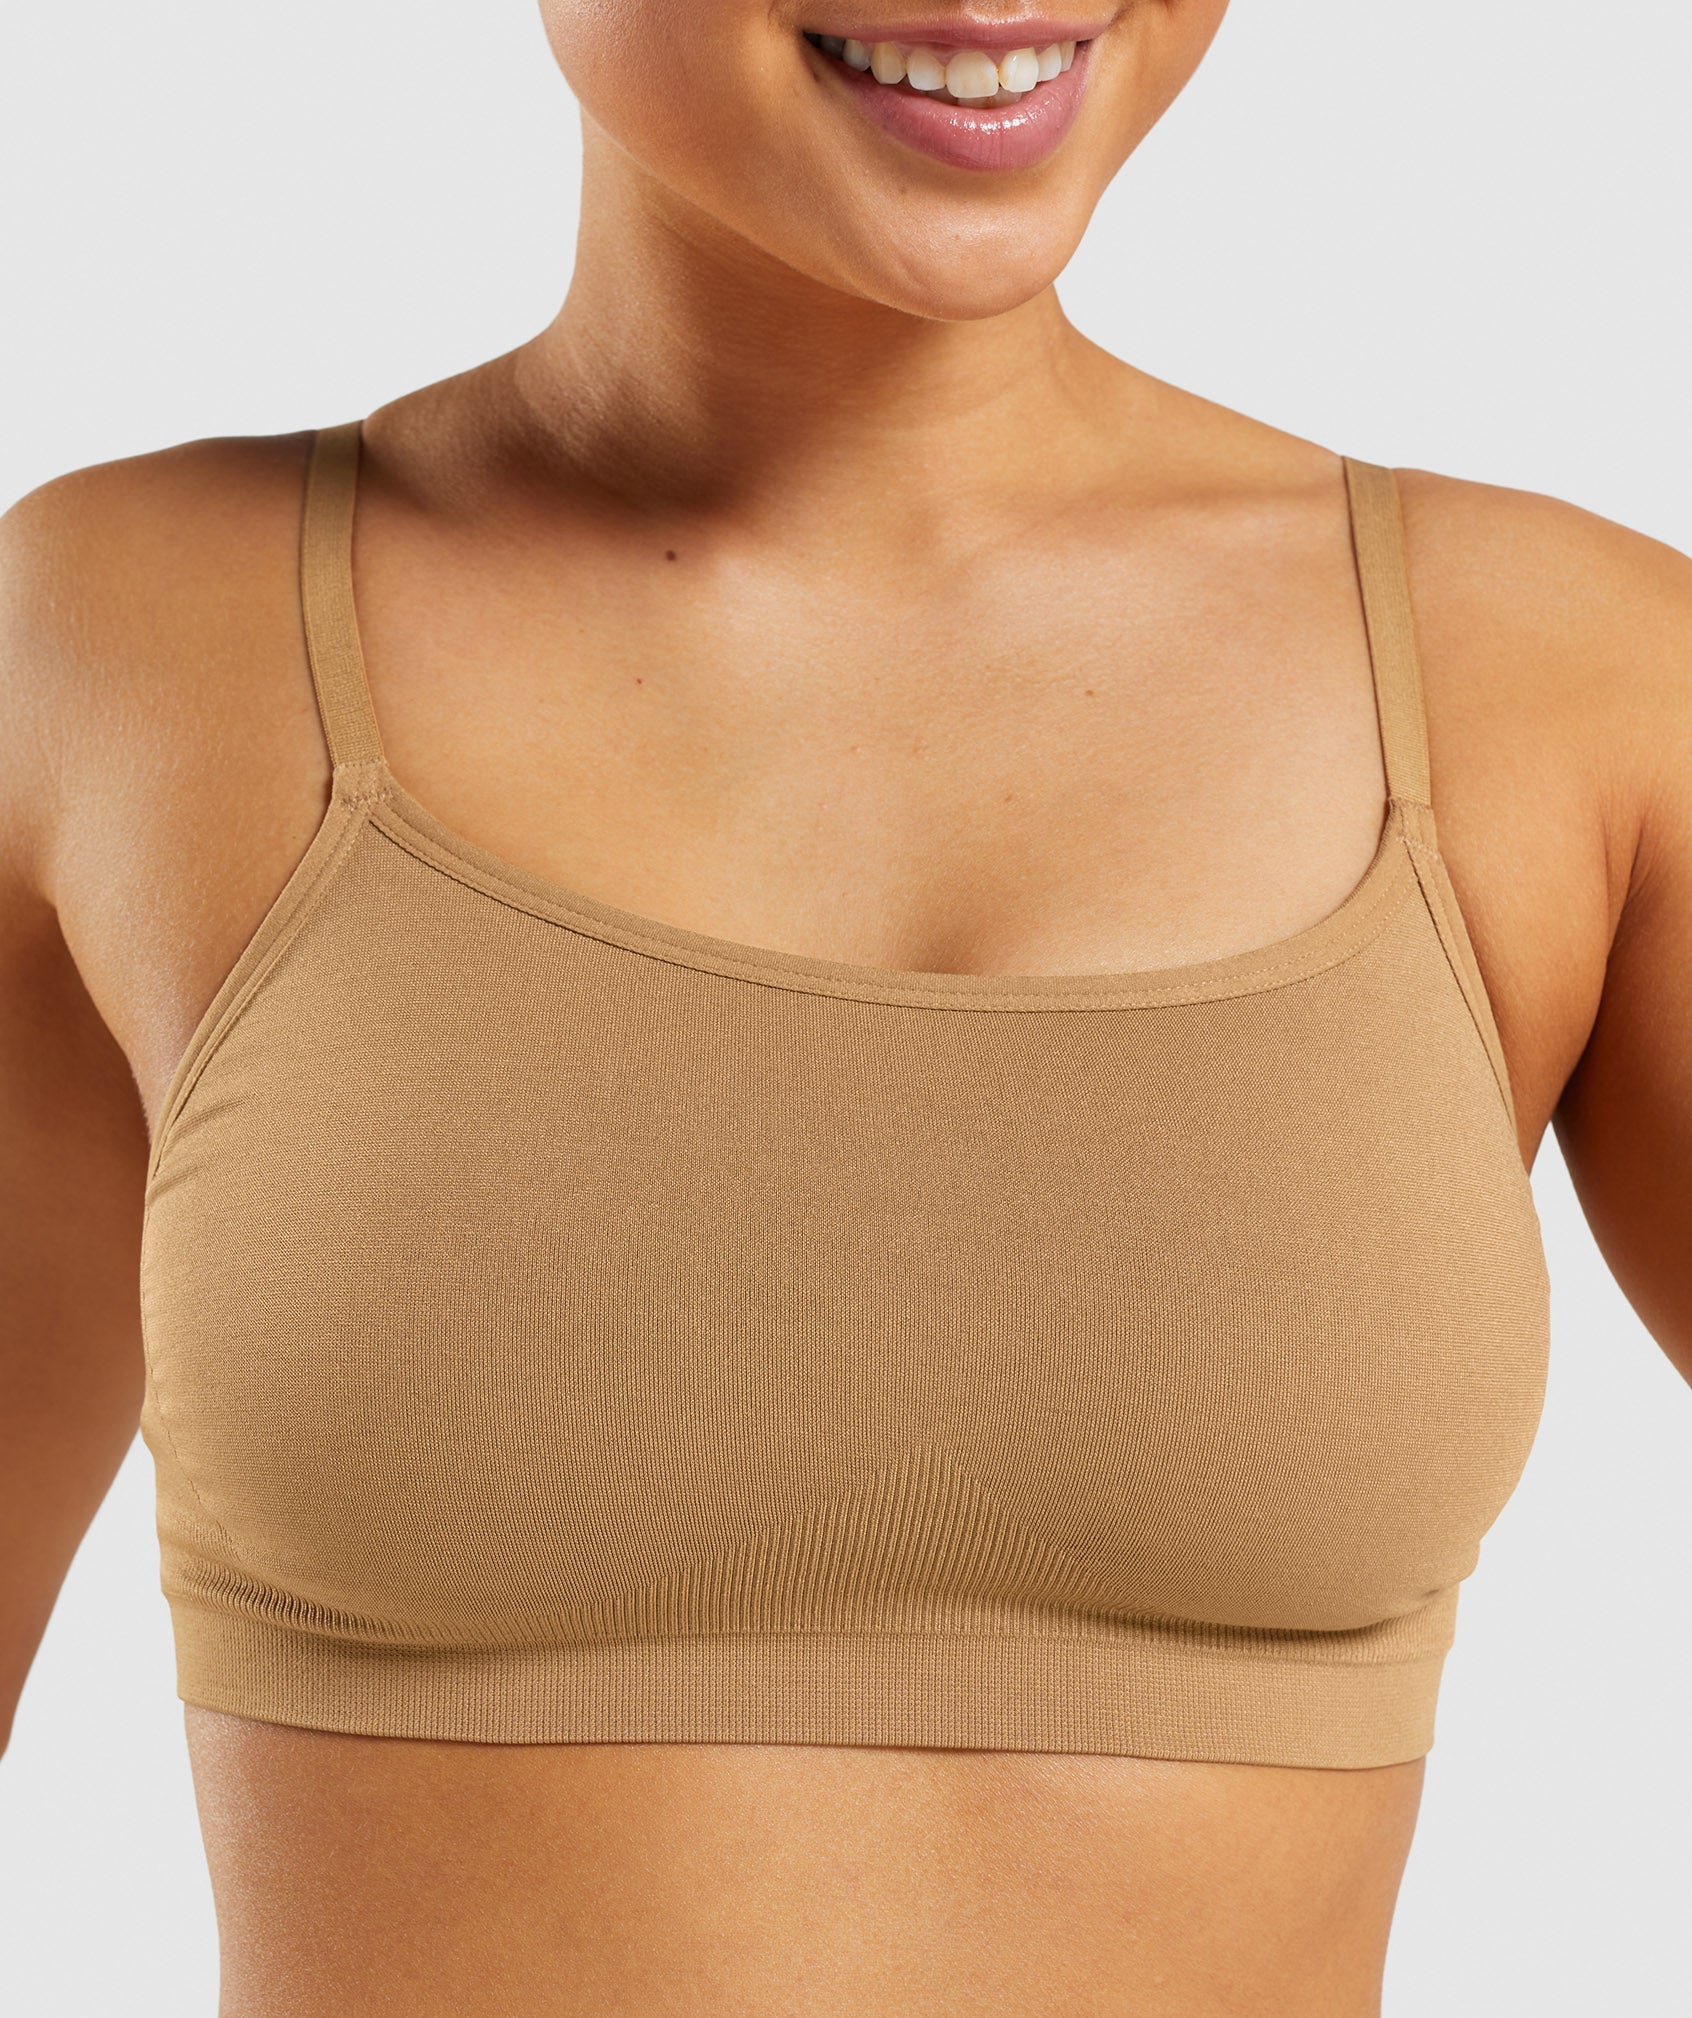 NEW Gymshark Women's Square Neck Bandeau Sports Bra in Nutmeg Brown Size  SMALL